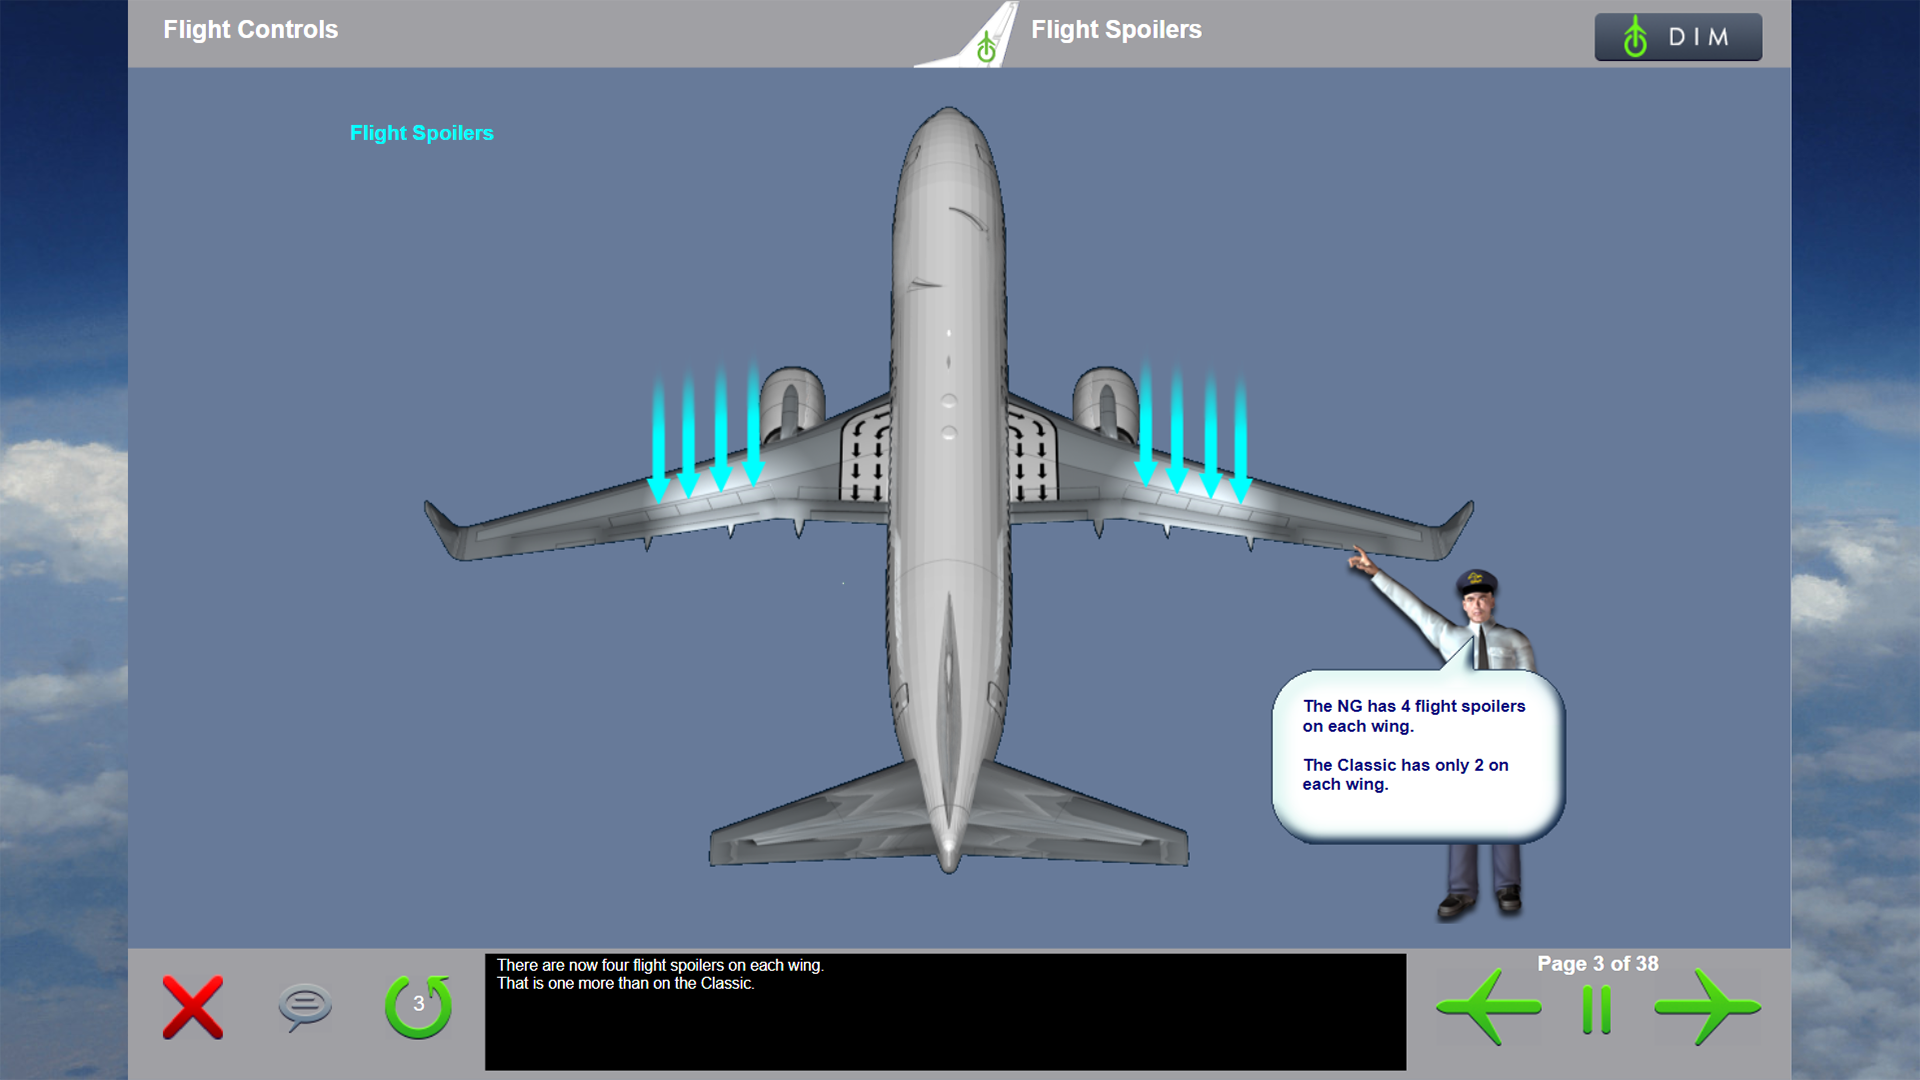 B737 Classic to B737NG Differences course example